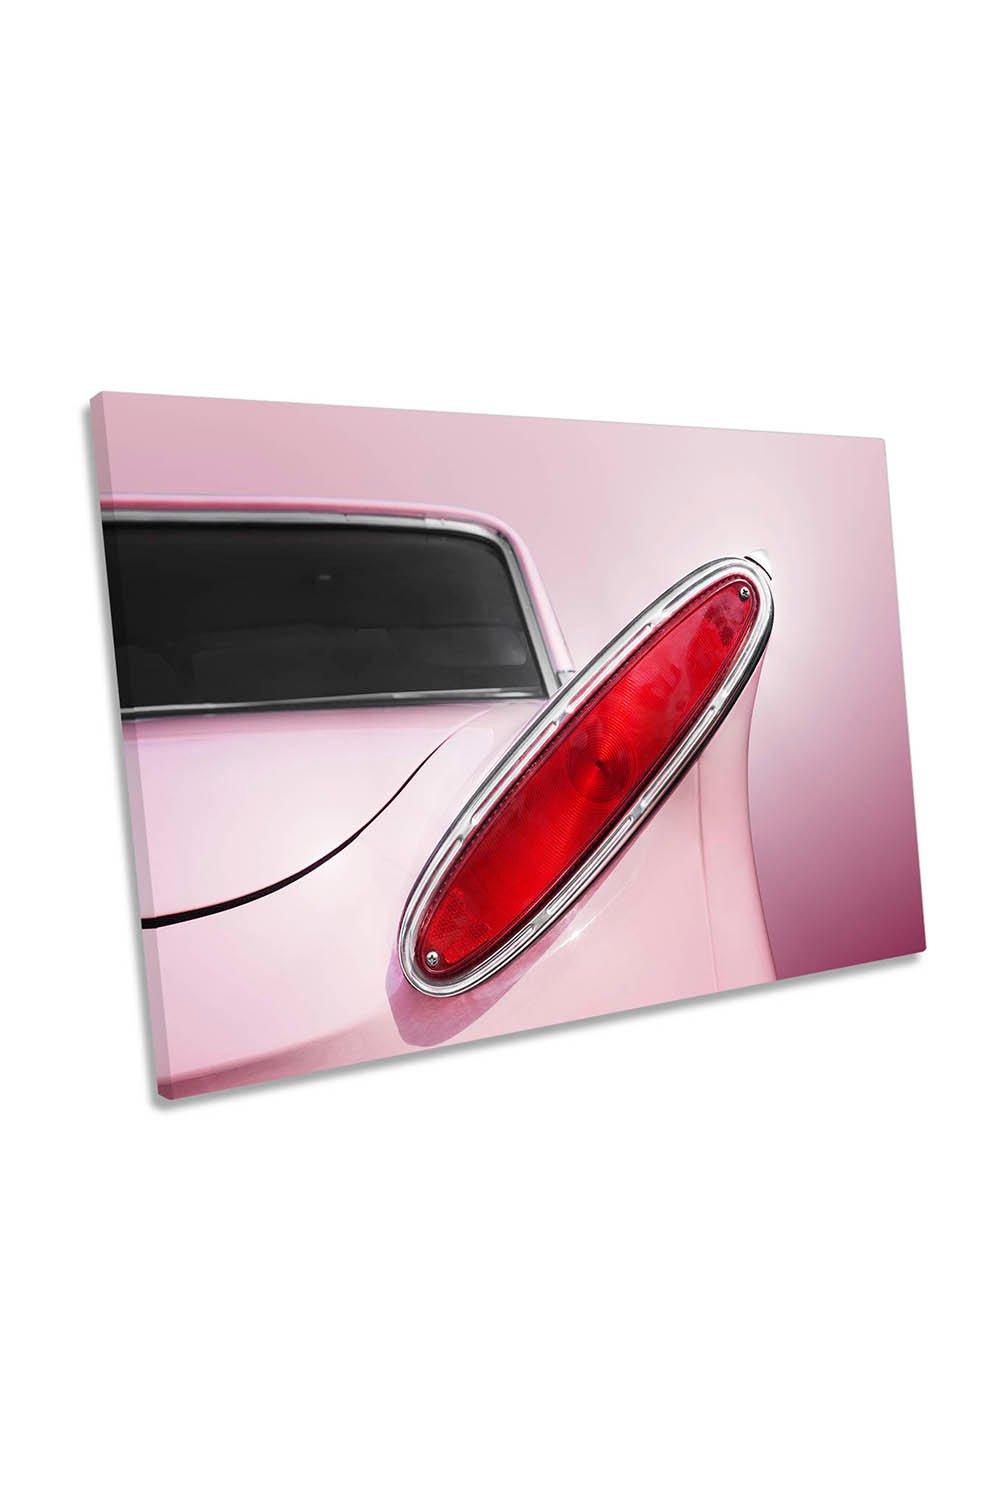 US Classic Car 1961 Comet Tail Fin Pink Canvas Wall Art Picture Print